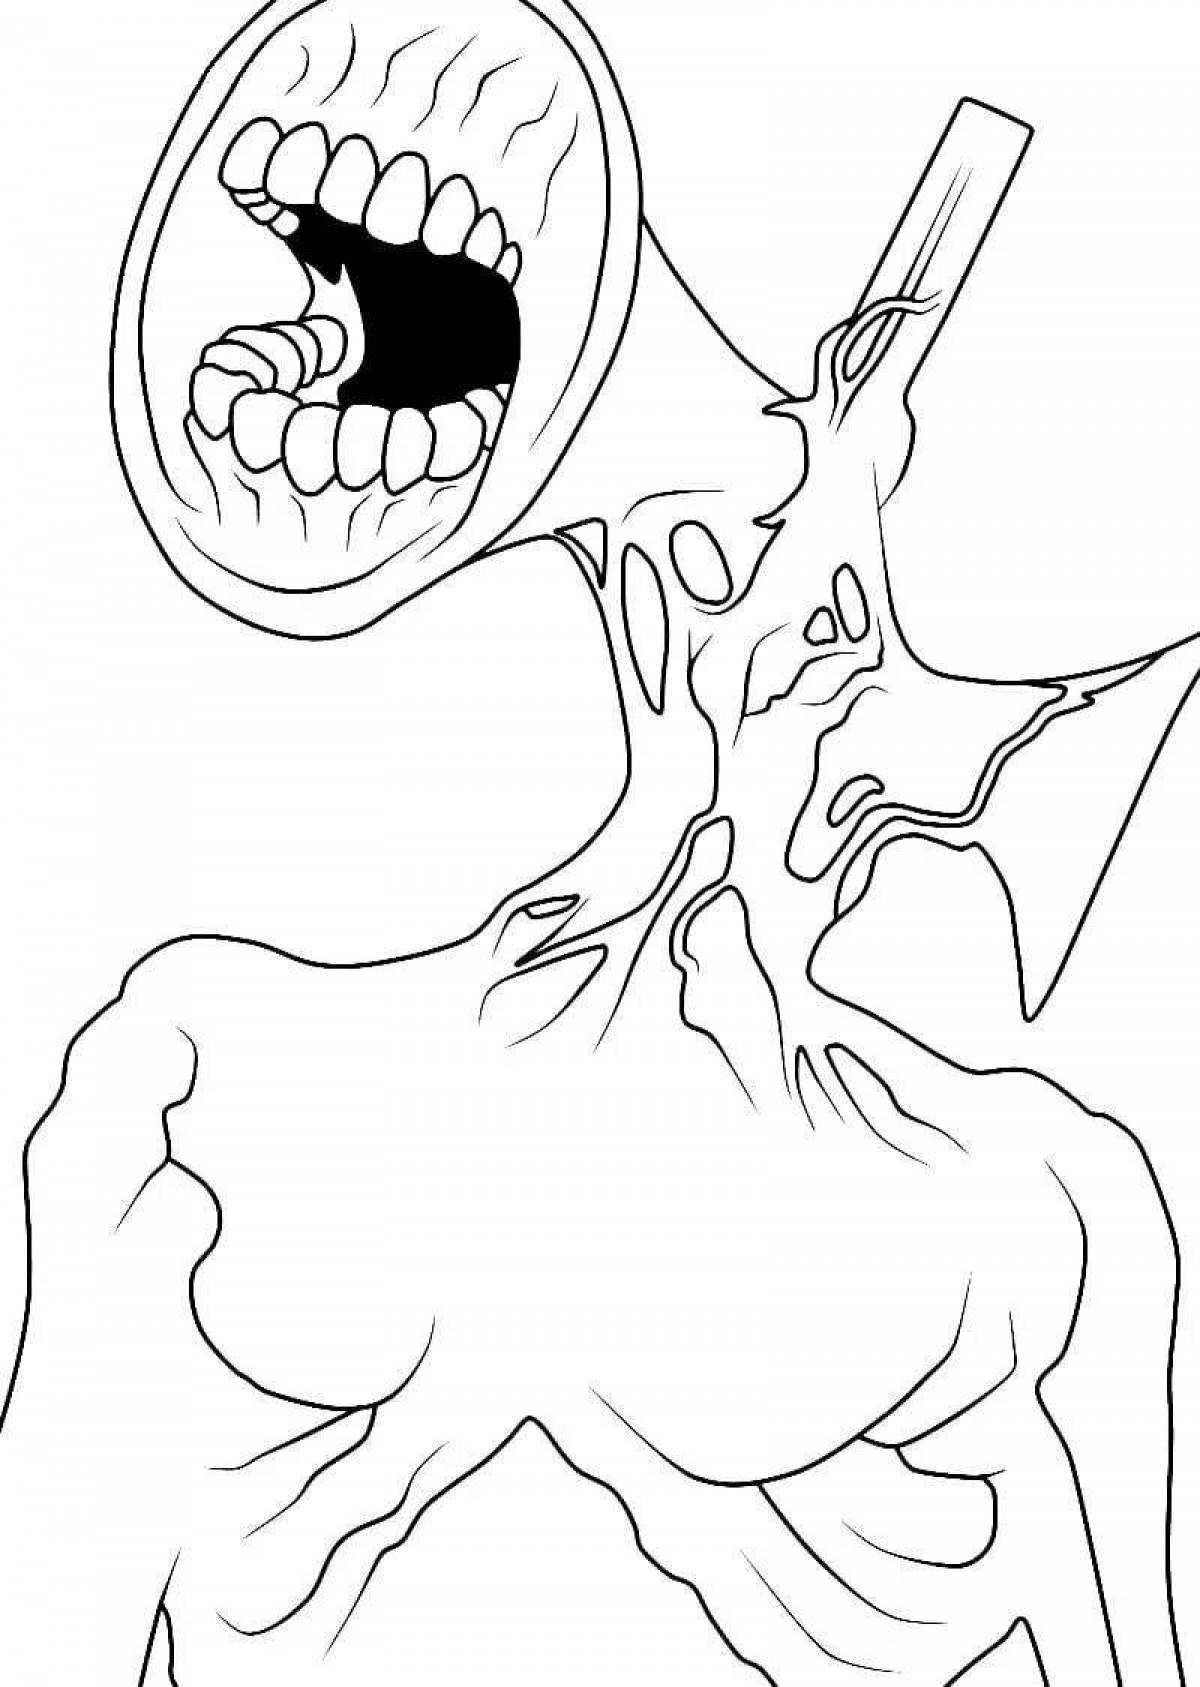 Coloring page of a gloomy monster with a siren's head